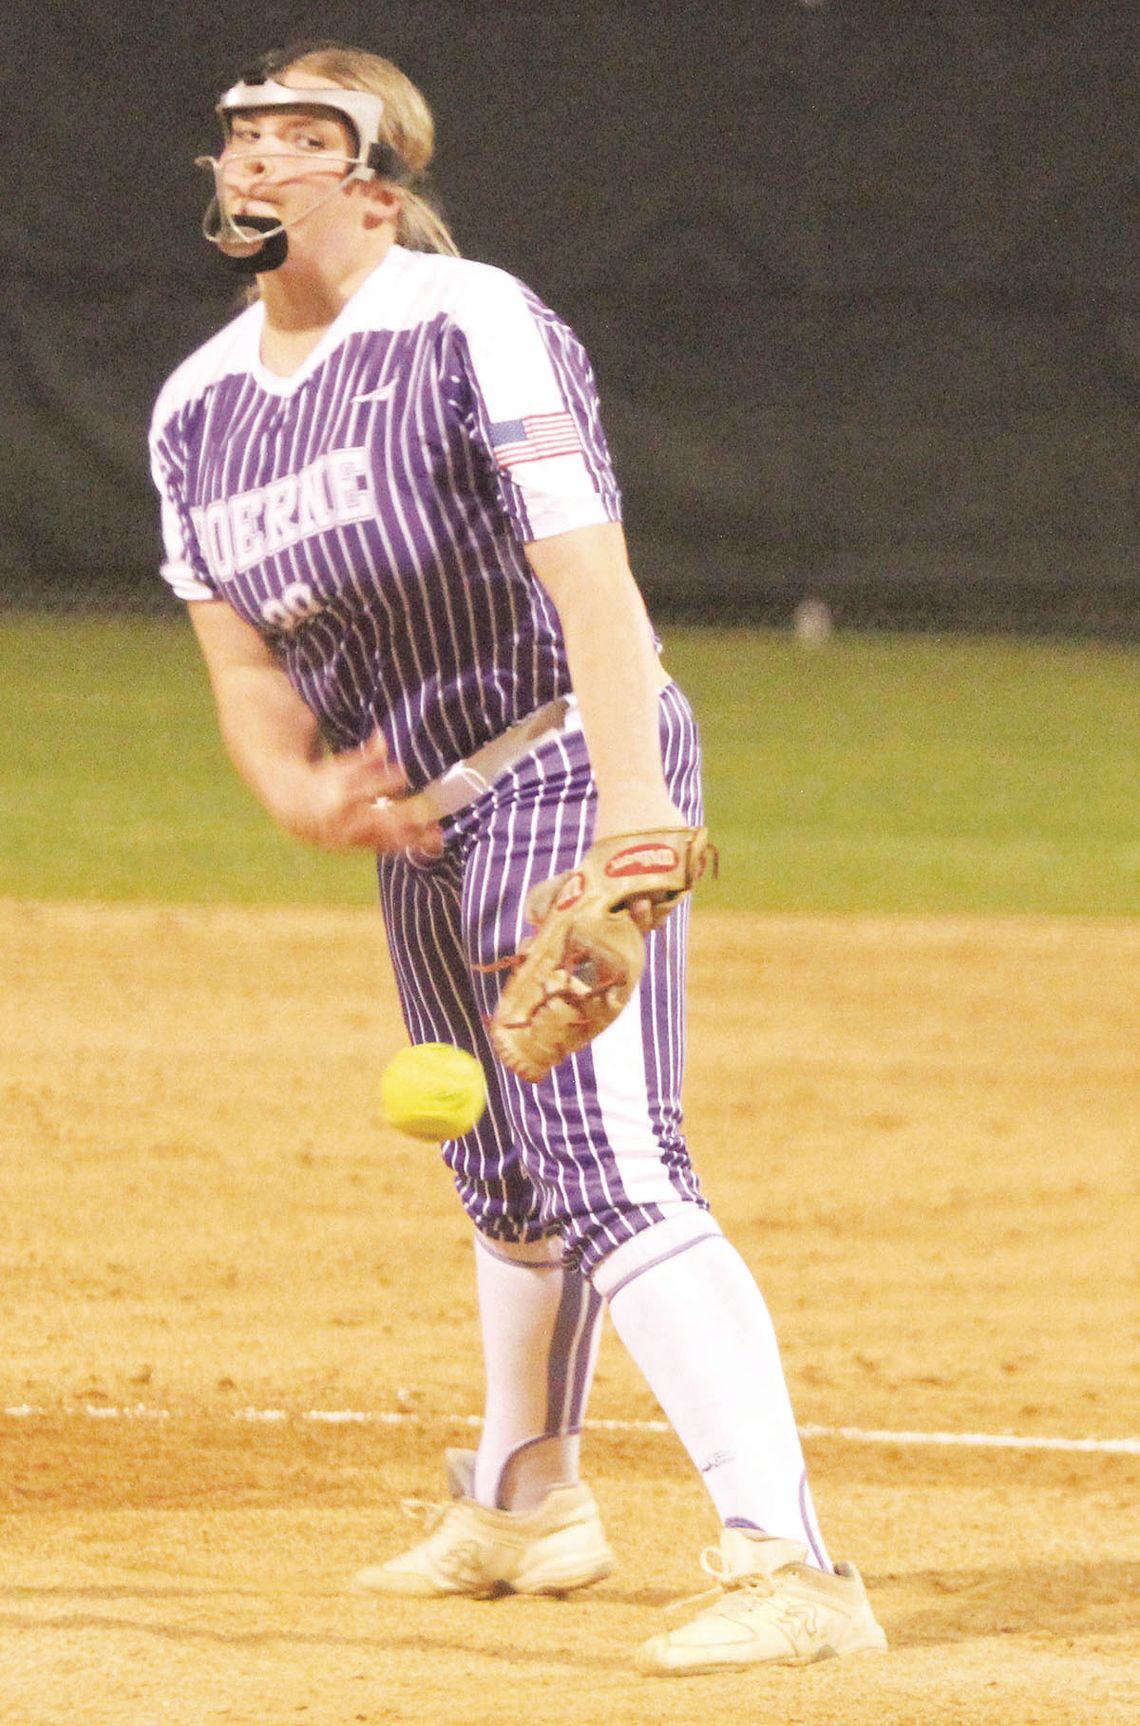 Hawks hold on to beat Boerne softball squad